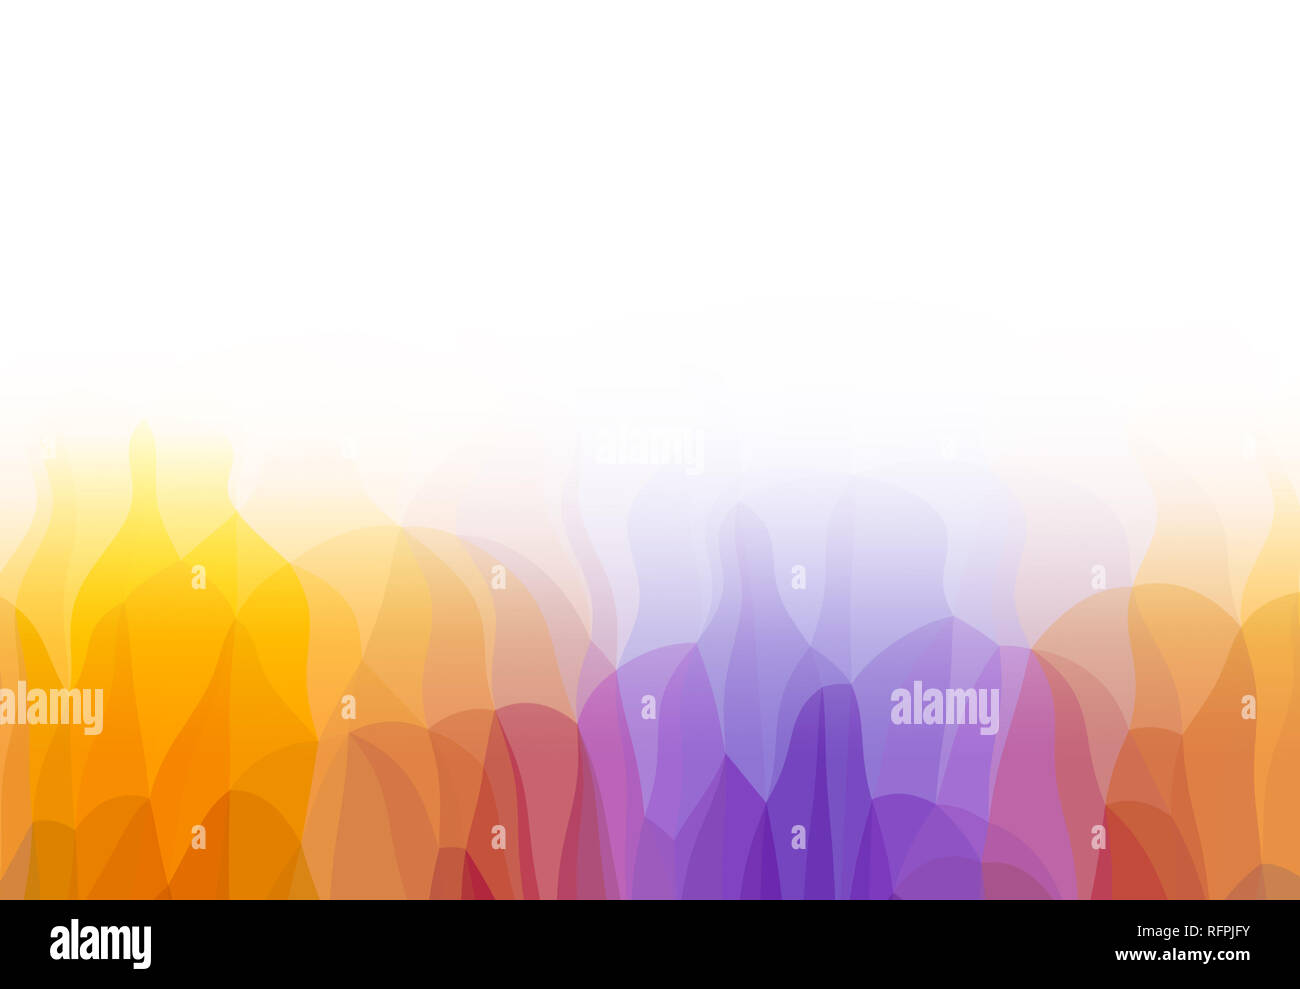 Wavy Multi-color Flames Background - Abstract Illustration with Copy Space Stock Photo